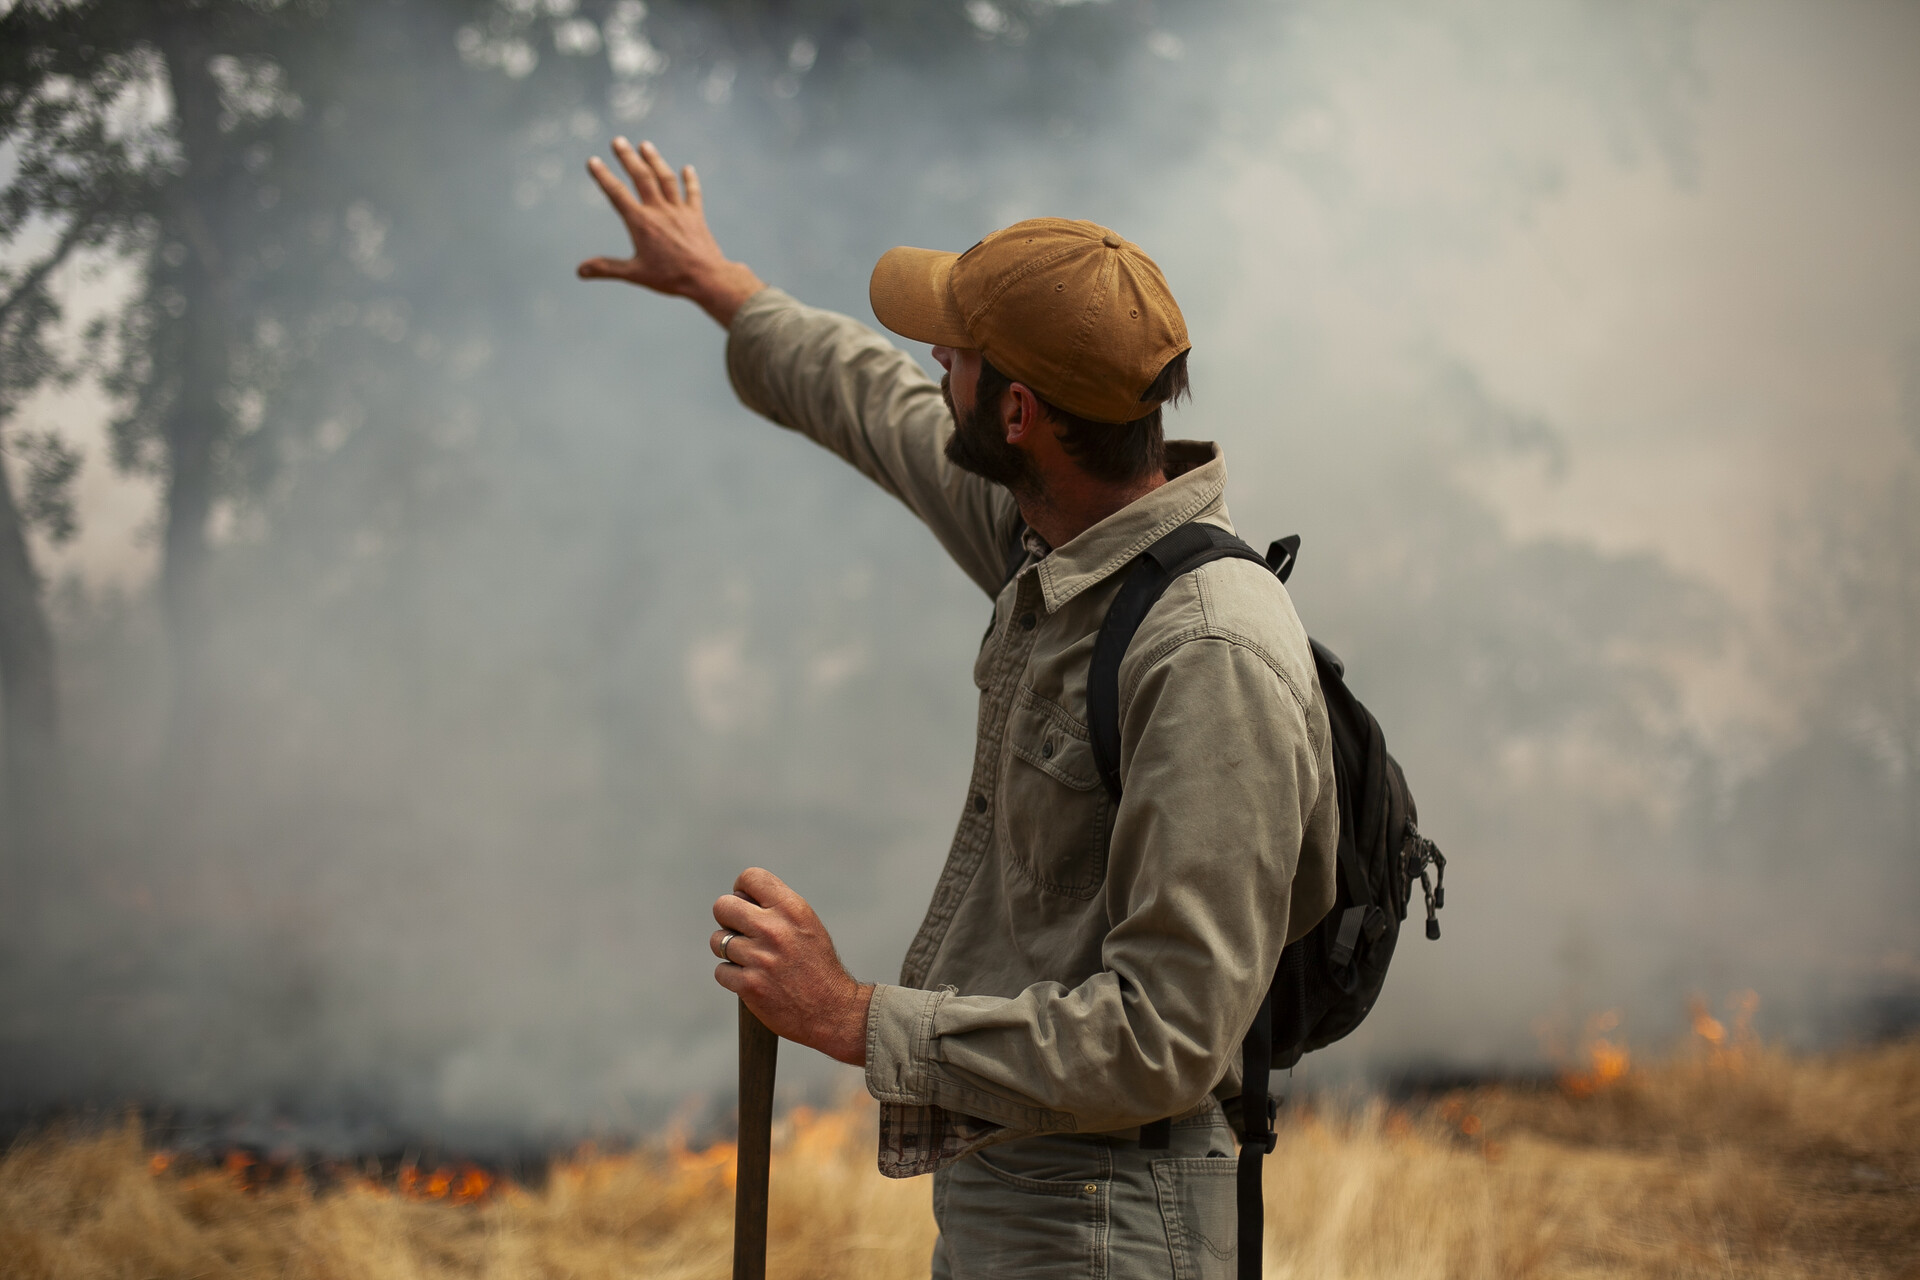 A man looks up and away from the camera while holding his arm out while brush burns nearby.